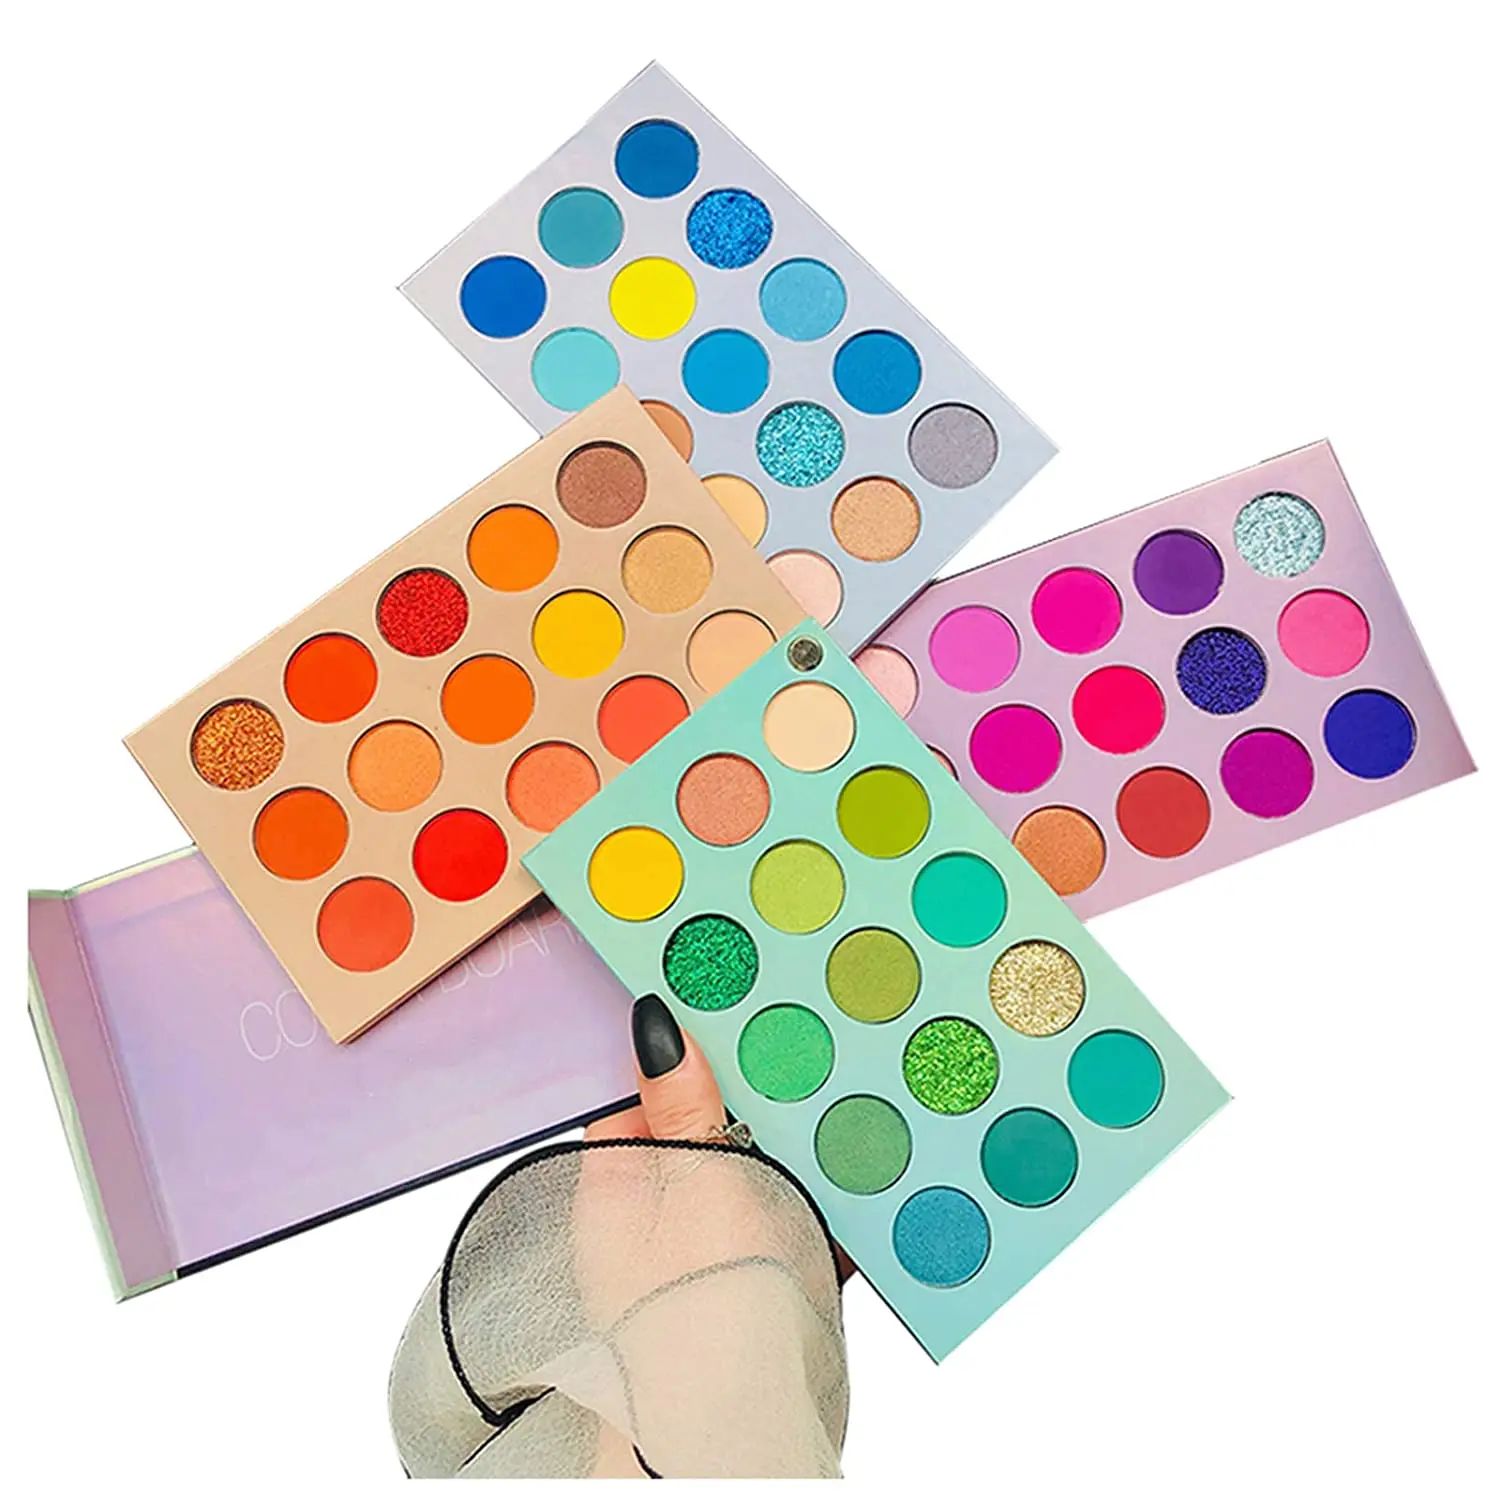 

60 Colors Eyeshadow Palette 4 in1 Color Board Makeup Palette Set Highly Pigmented Glitter Metallic Matte Shimmer Natural Ultra, Picture color